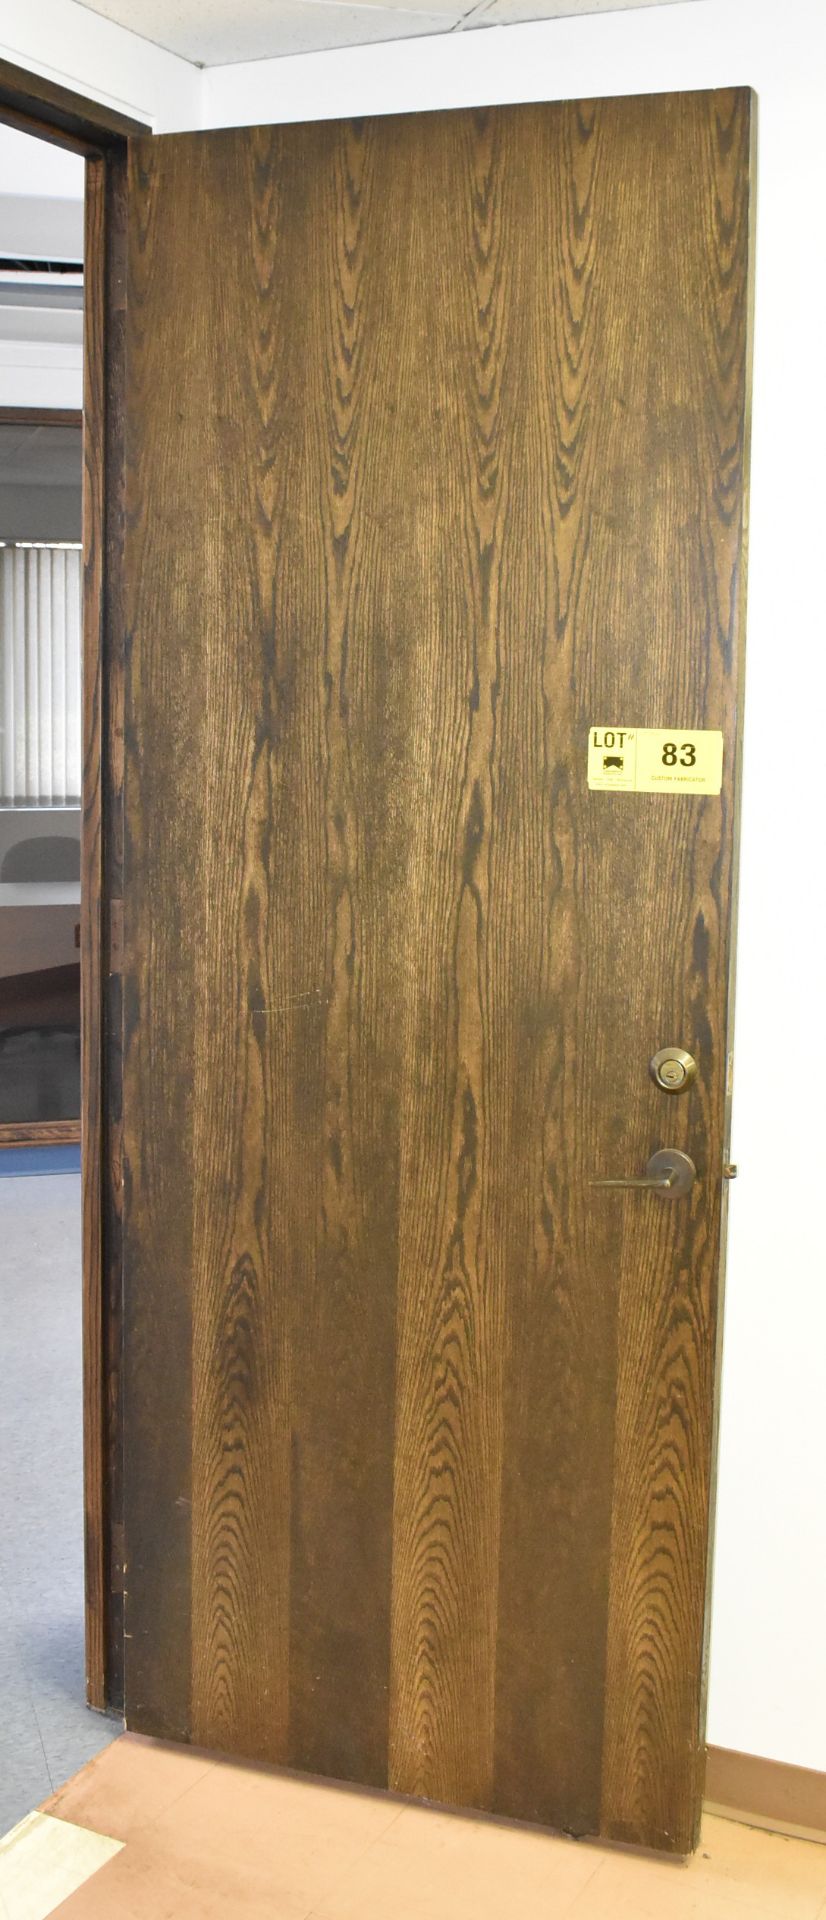 LOT/ (10) 94.5"x35" wooden doors with hardware throughout office